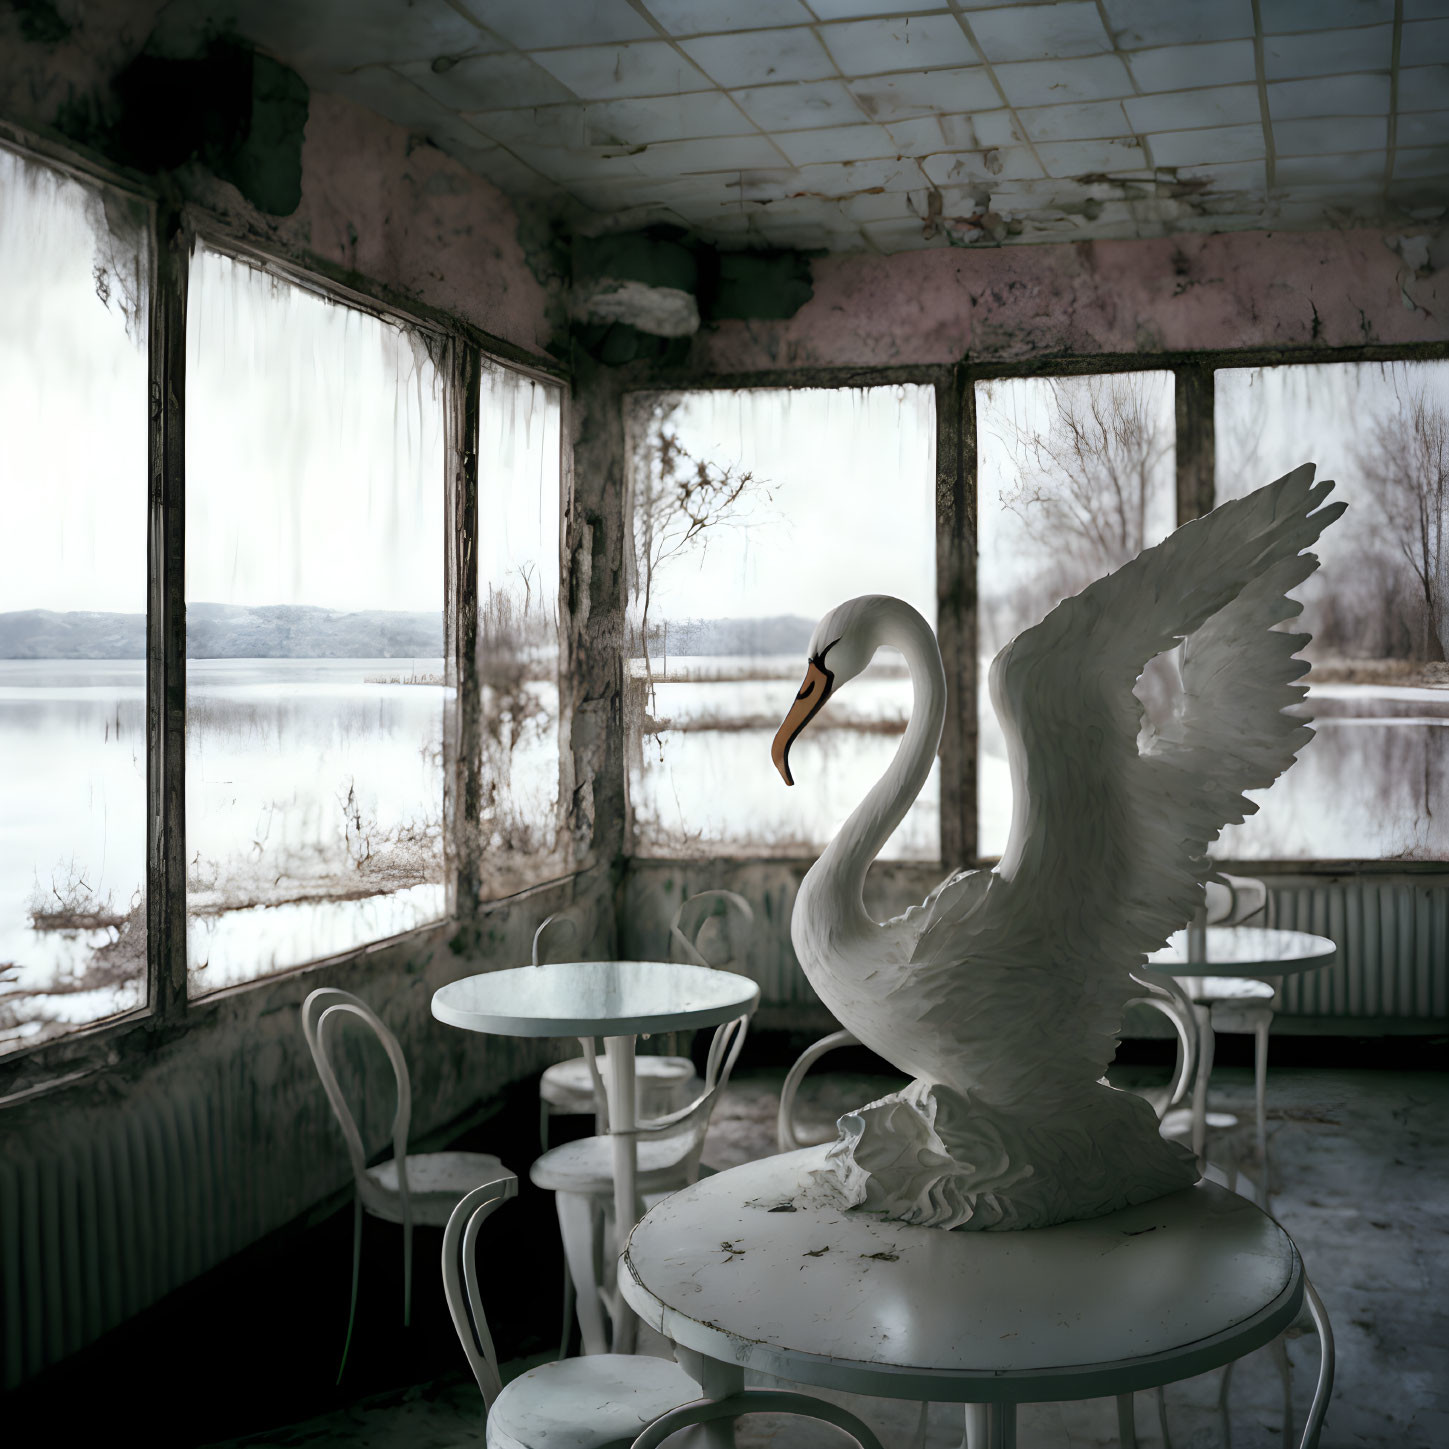 Swan sculpture with spread wings in abandoned cafe overlooking foggy waterscape